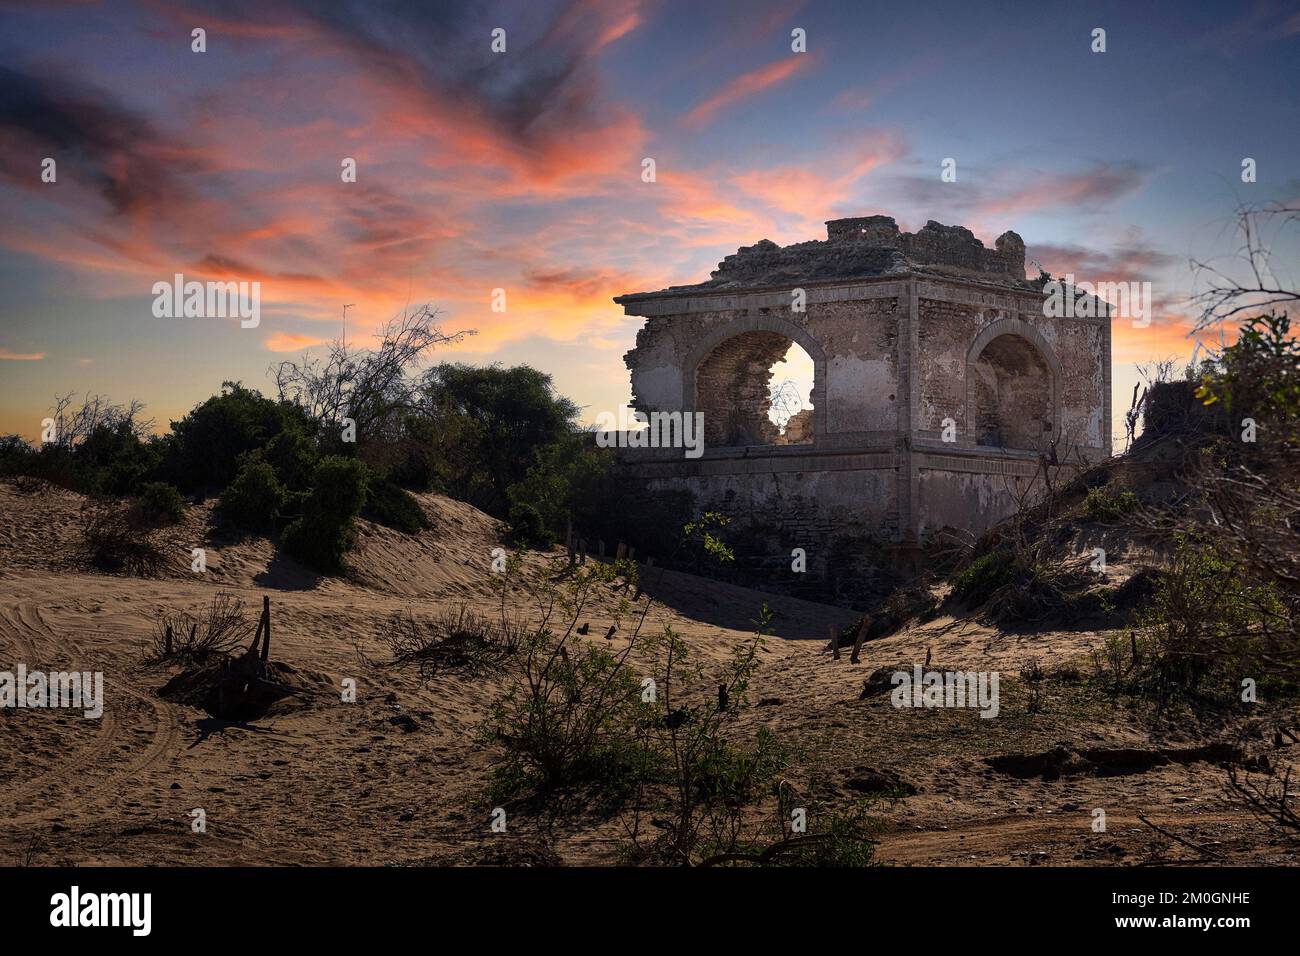 Ruin of an old fort in the dunes, sunset, Diabat, Essaouira, Morocco, Africa Stock Photo